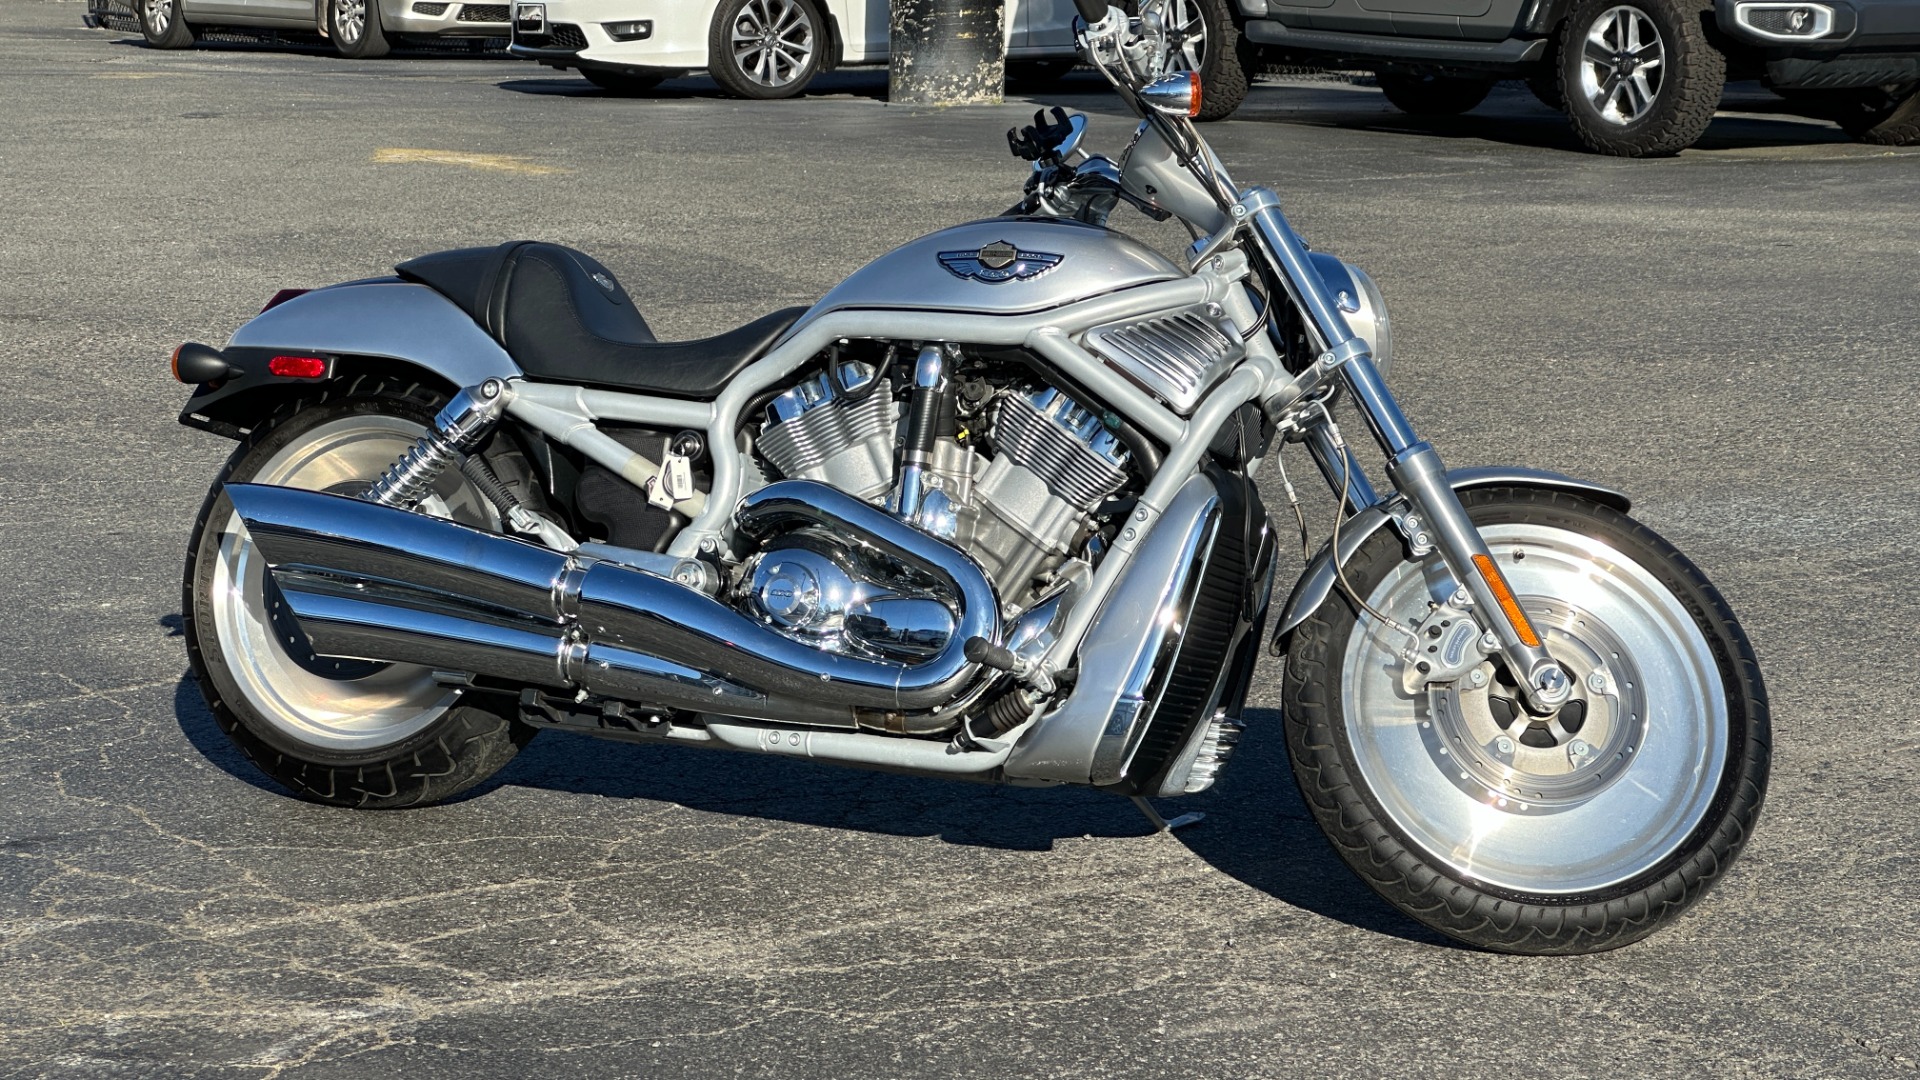 Used 2003 Harley Davidson V Rod ANNIVERSARY EDITION / 1130CC ENGINE / BREMBO BRAKES / VORTEX AIR SCOOPS for sale $9,995 at Formula Imports in Charlotte NC 28227 62